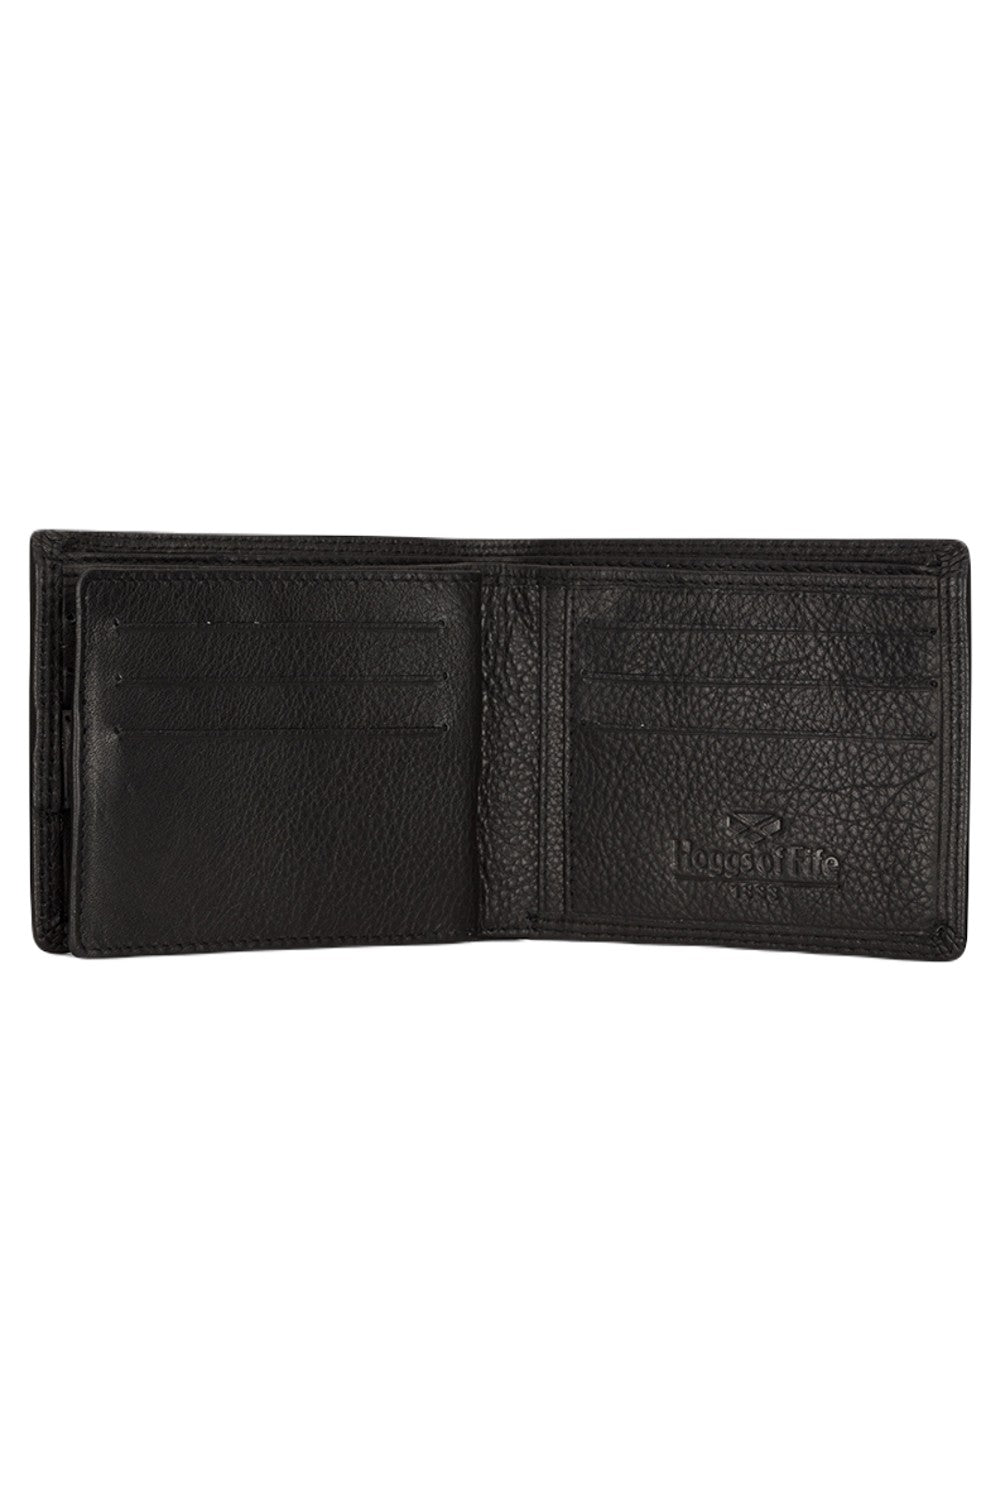 Hoggs of Fife Monarch Leather Credit Card Wallet in Black 